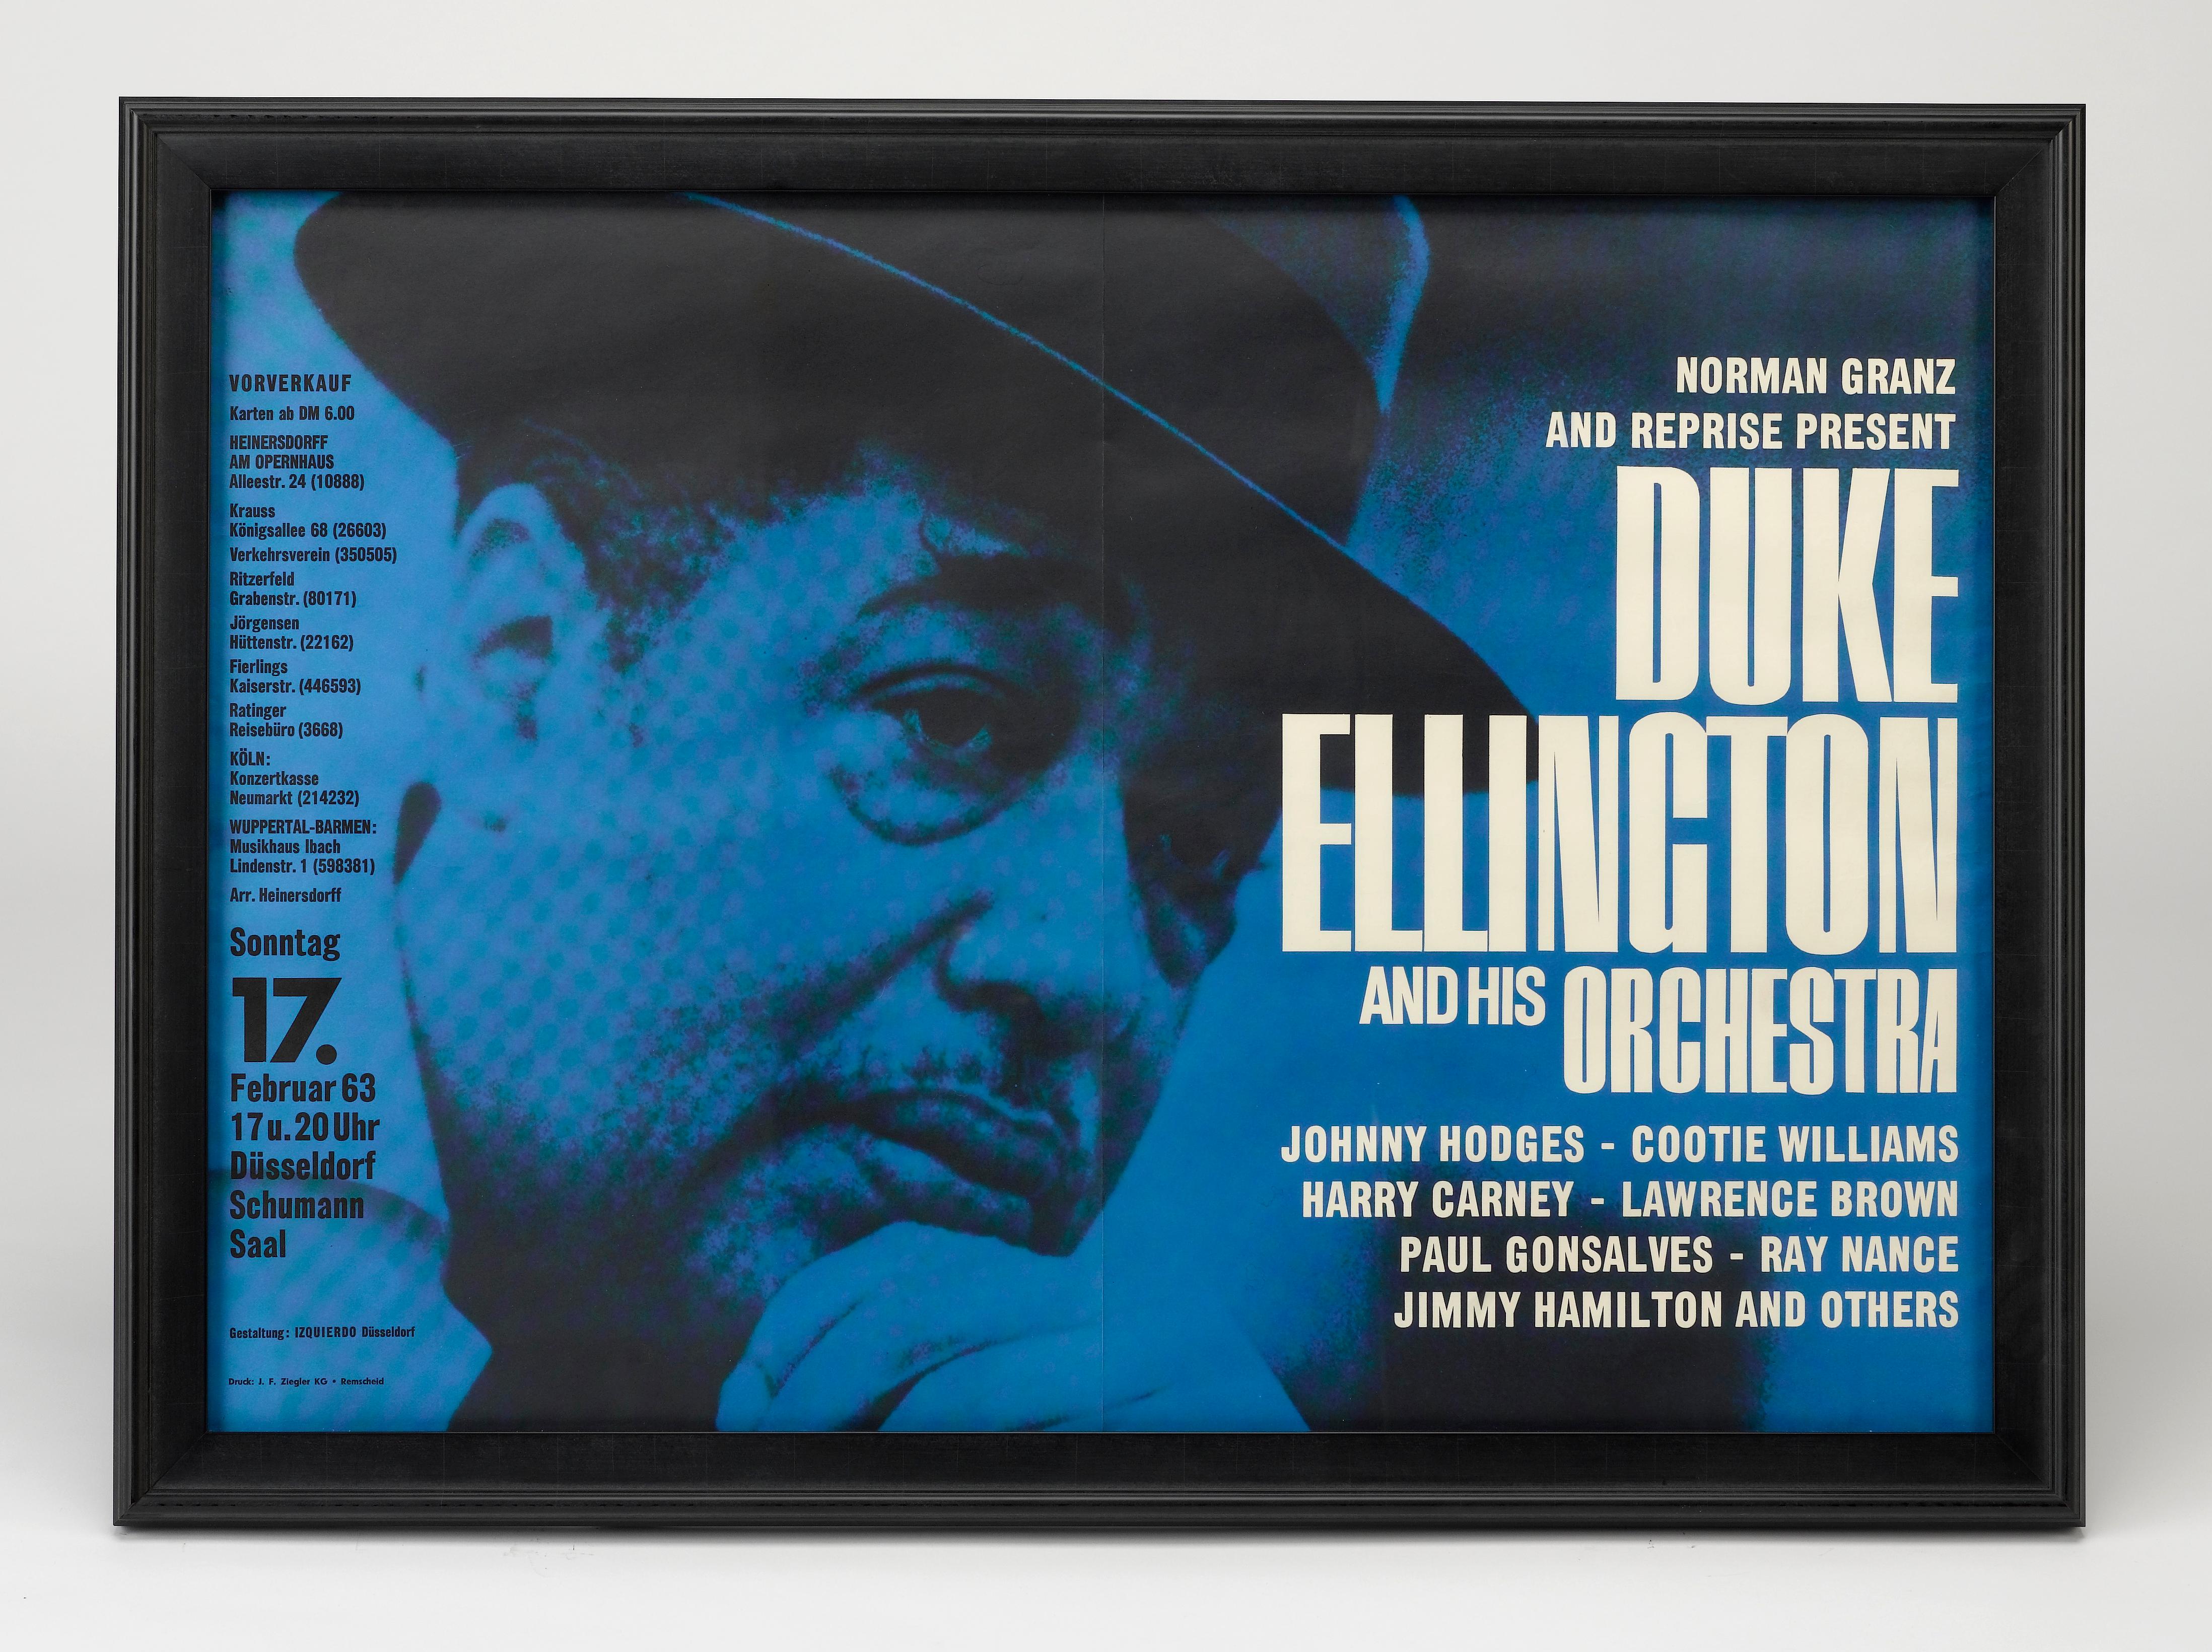 This is a 1963 jazz music event poster for a concert for Duke Ellington and His Orchestra in Dusseldorf, Germany on February 17, 1963.

Duke Ellington (1899-1974) was an American composer, pianist, and bandleader of a jazz orchestra, which he led